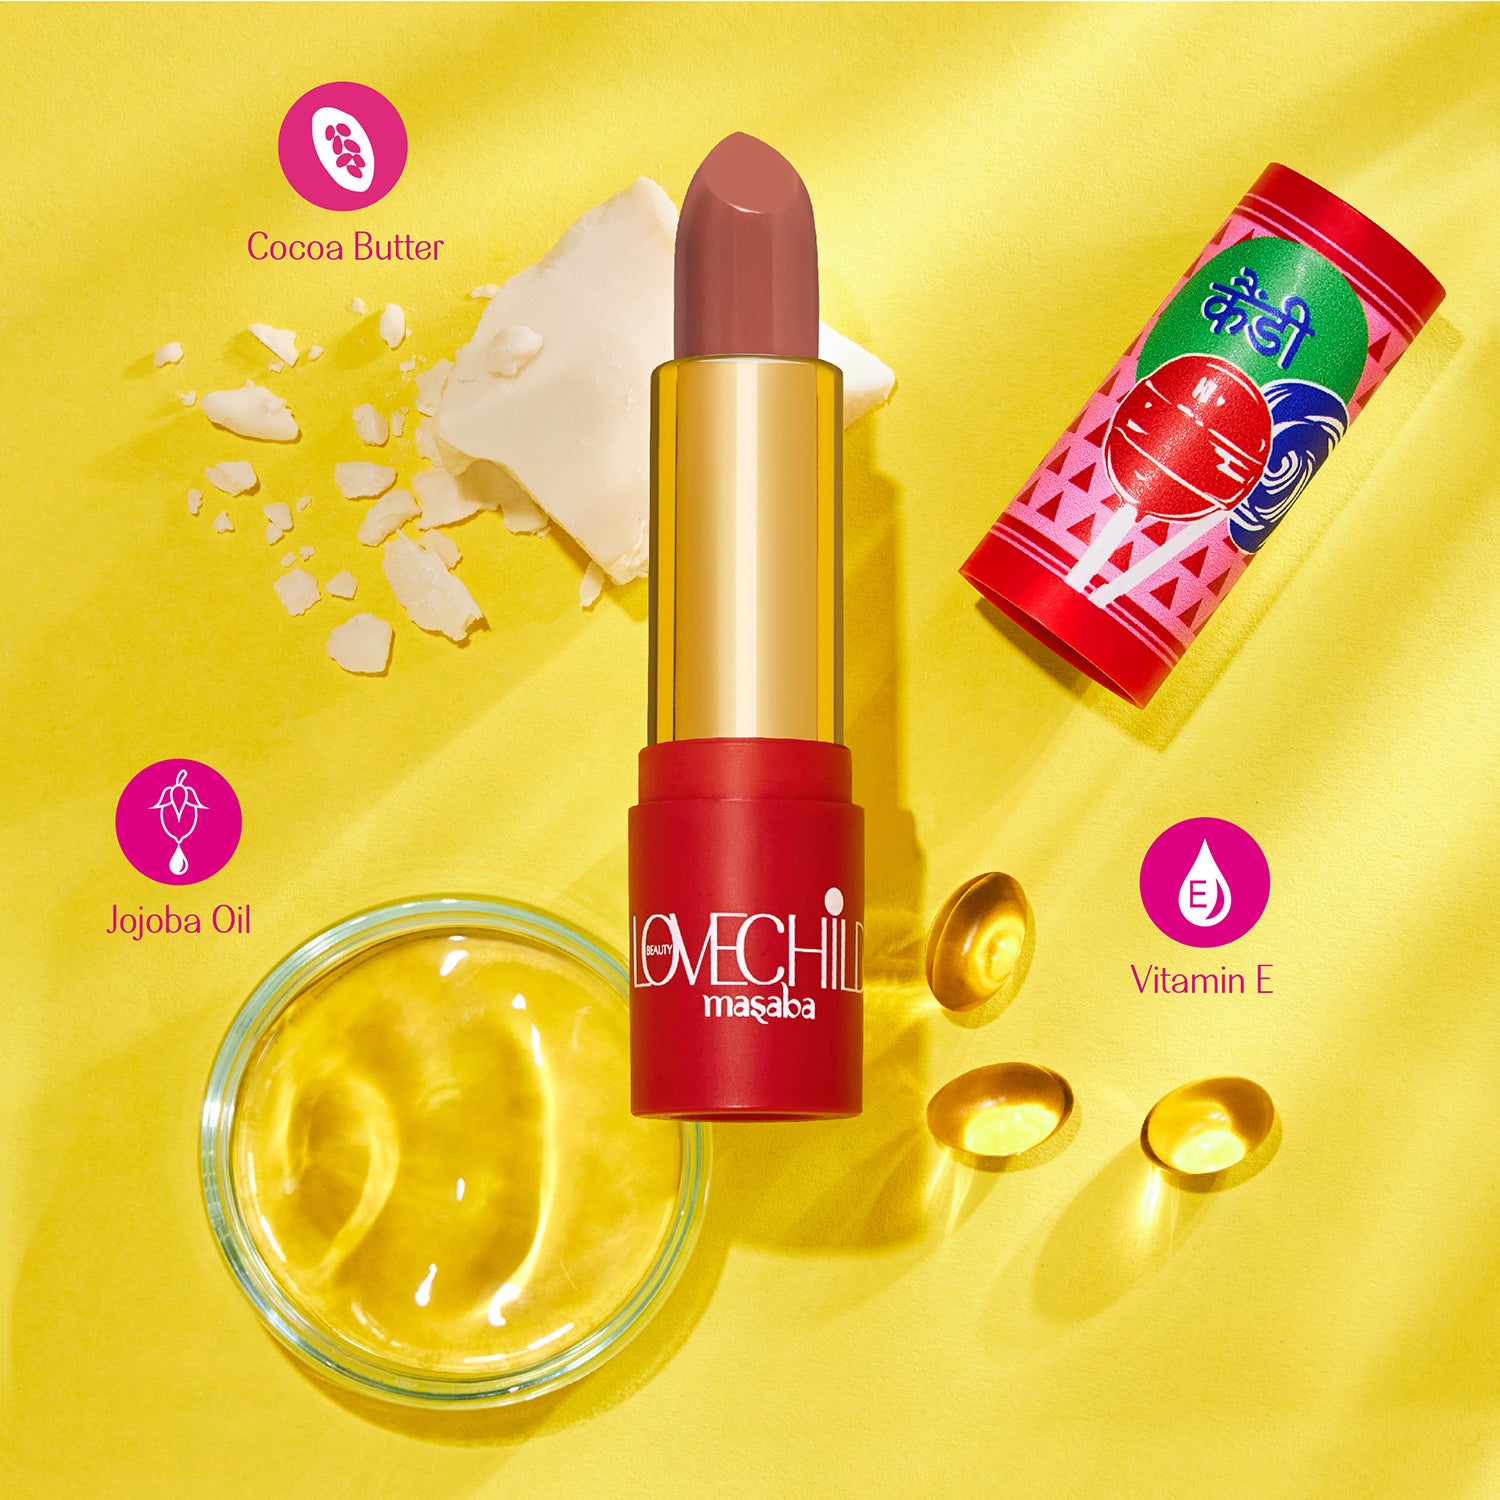 LoveChild Masaba - For the Kid in You! - 01 Eye-candy - Luxe Matte Lipstick